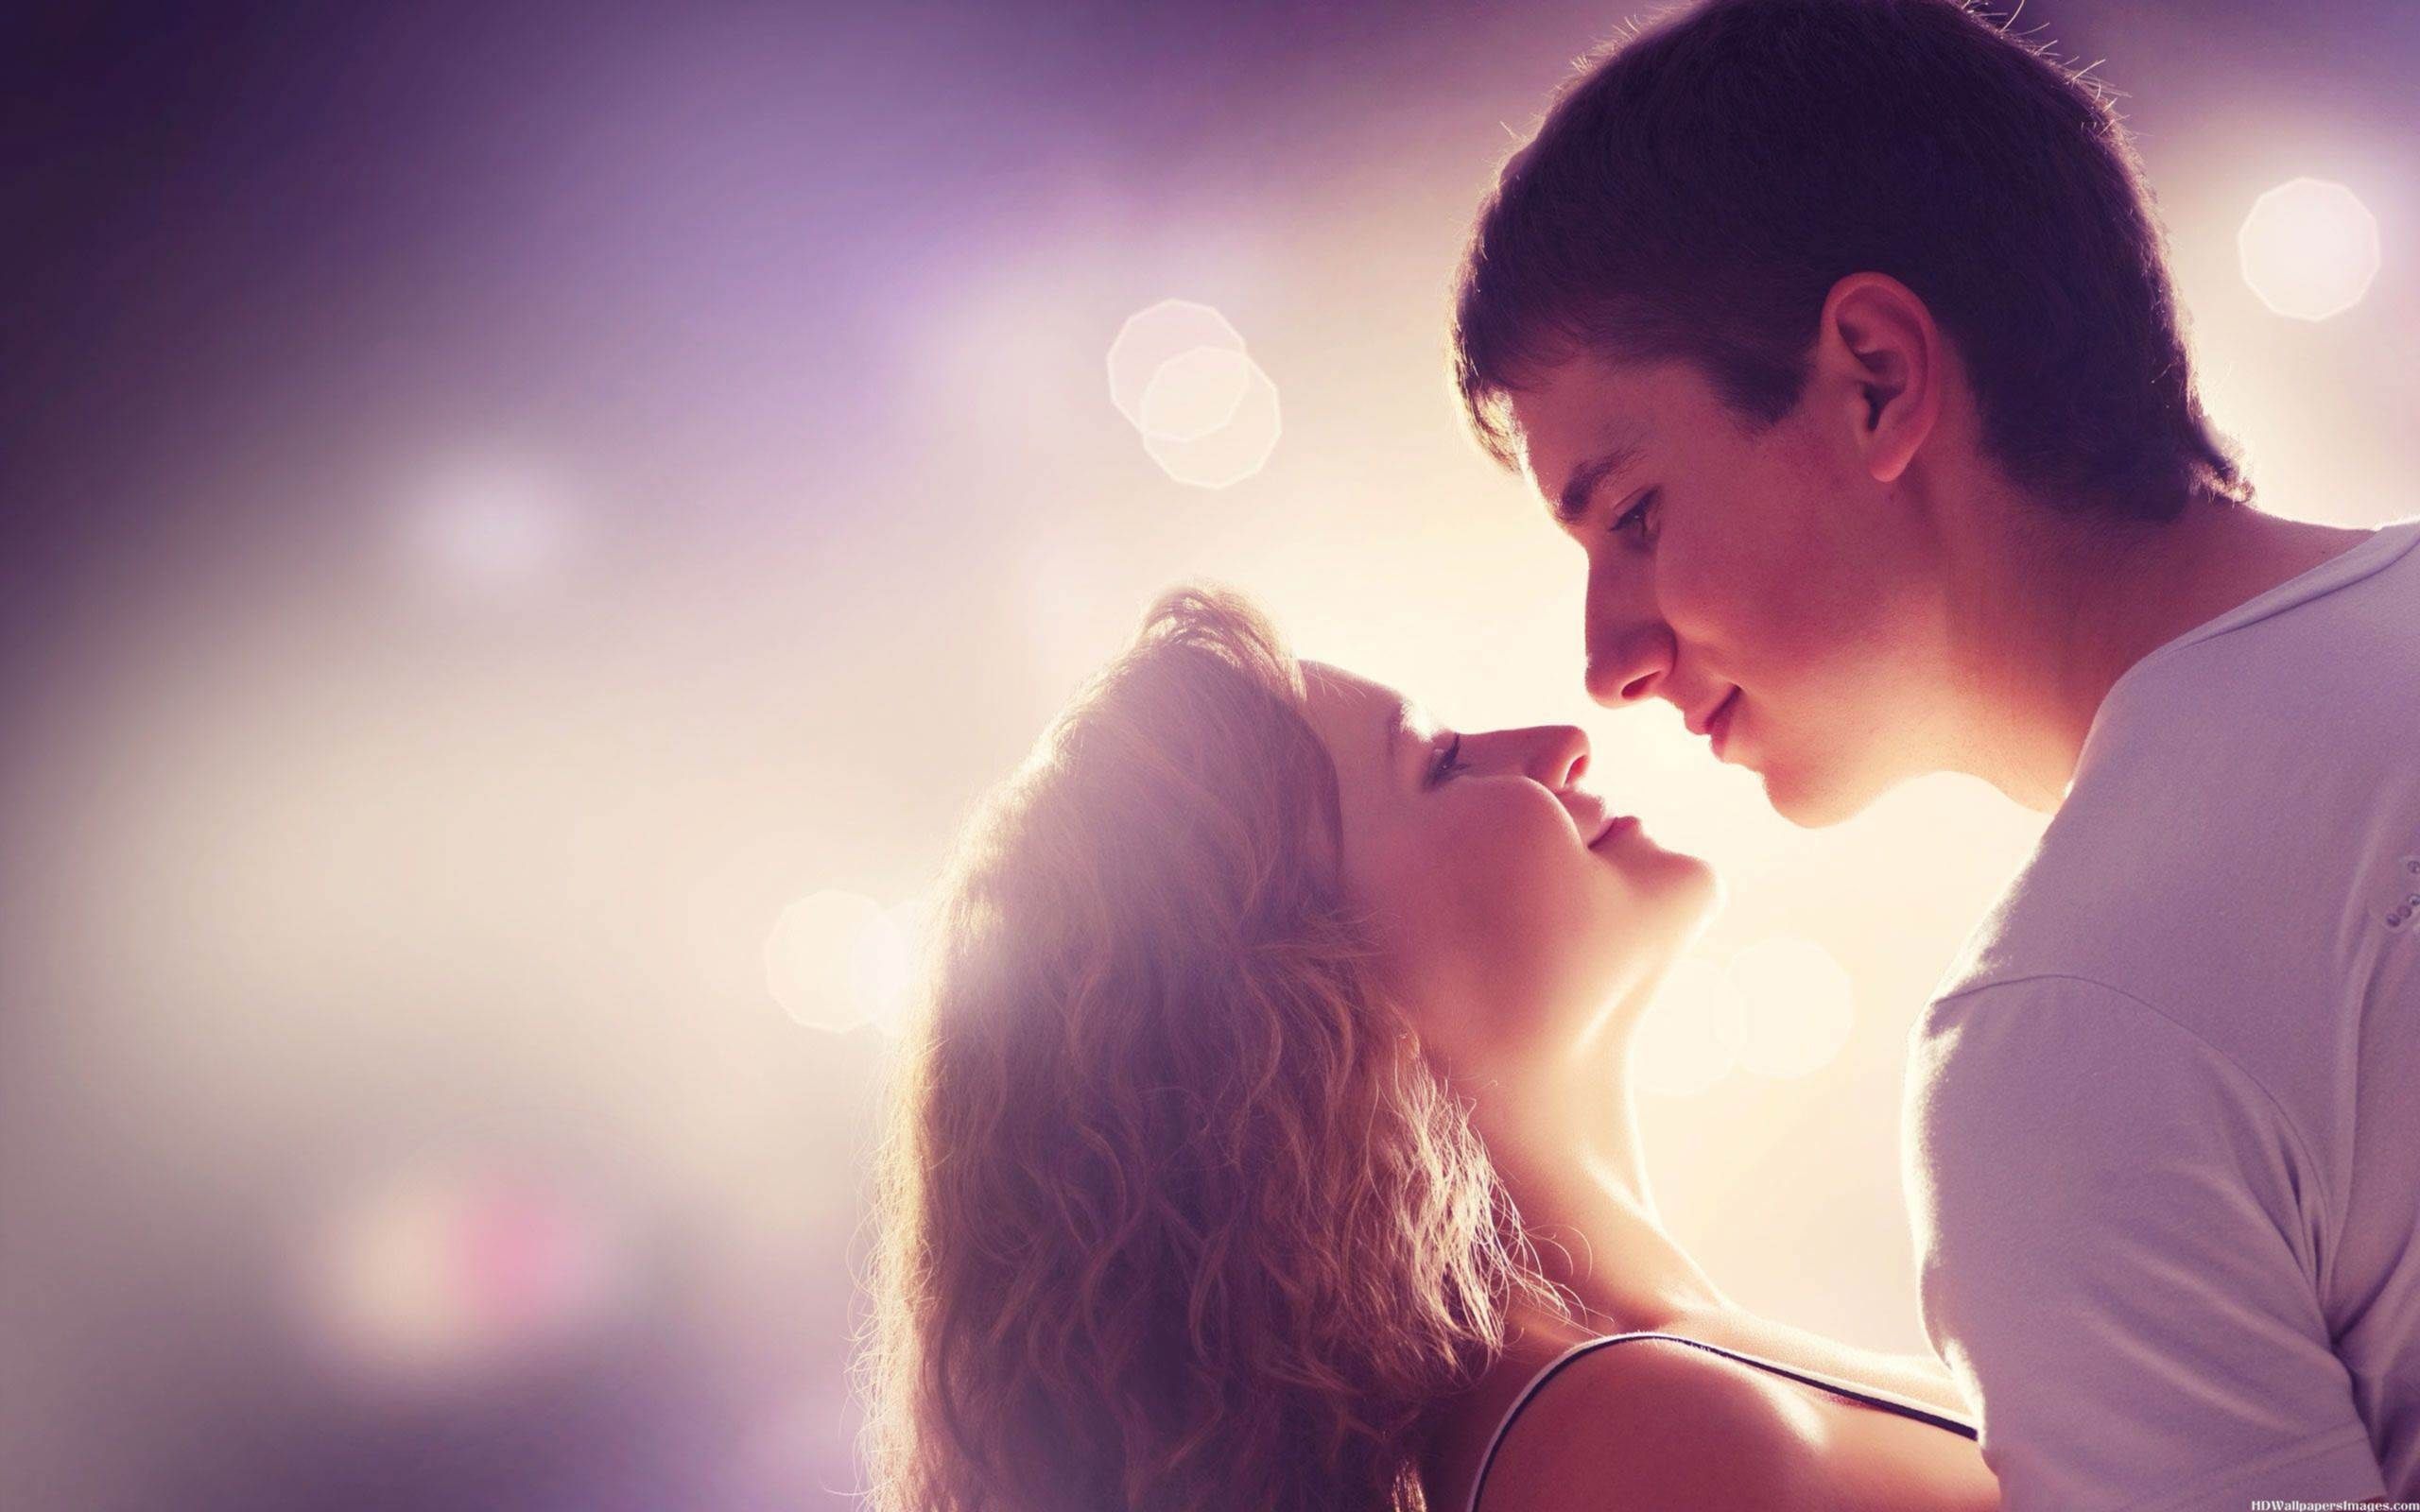 Romantic Images HD For Love And Romance – Latest Romantic Hd ...